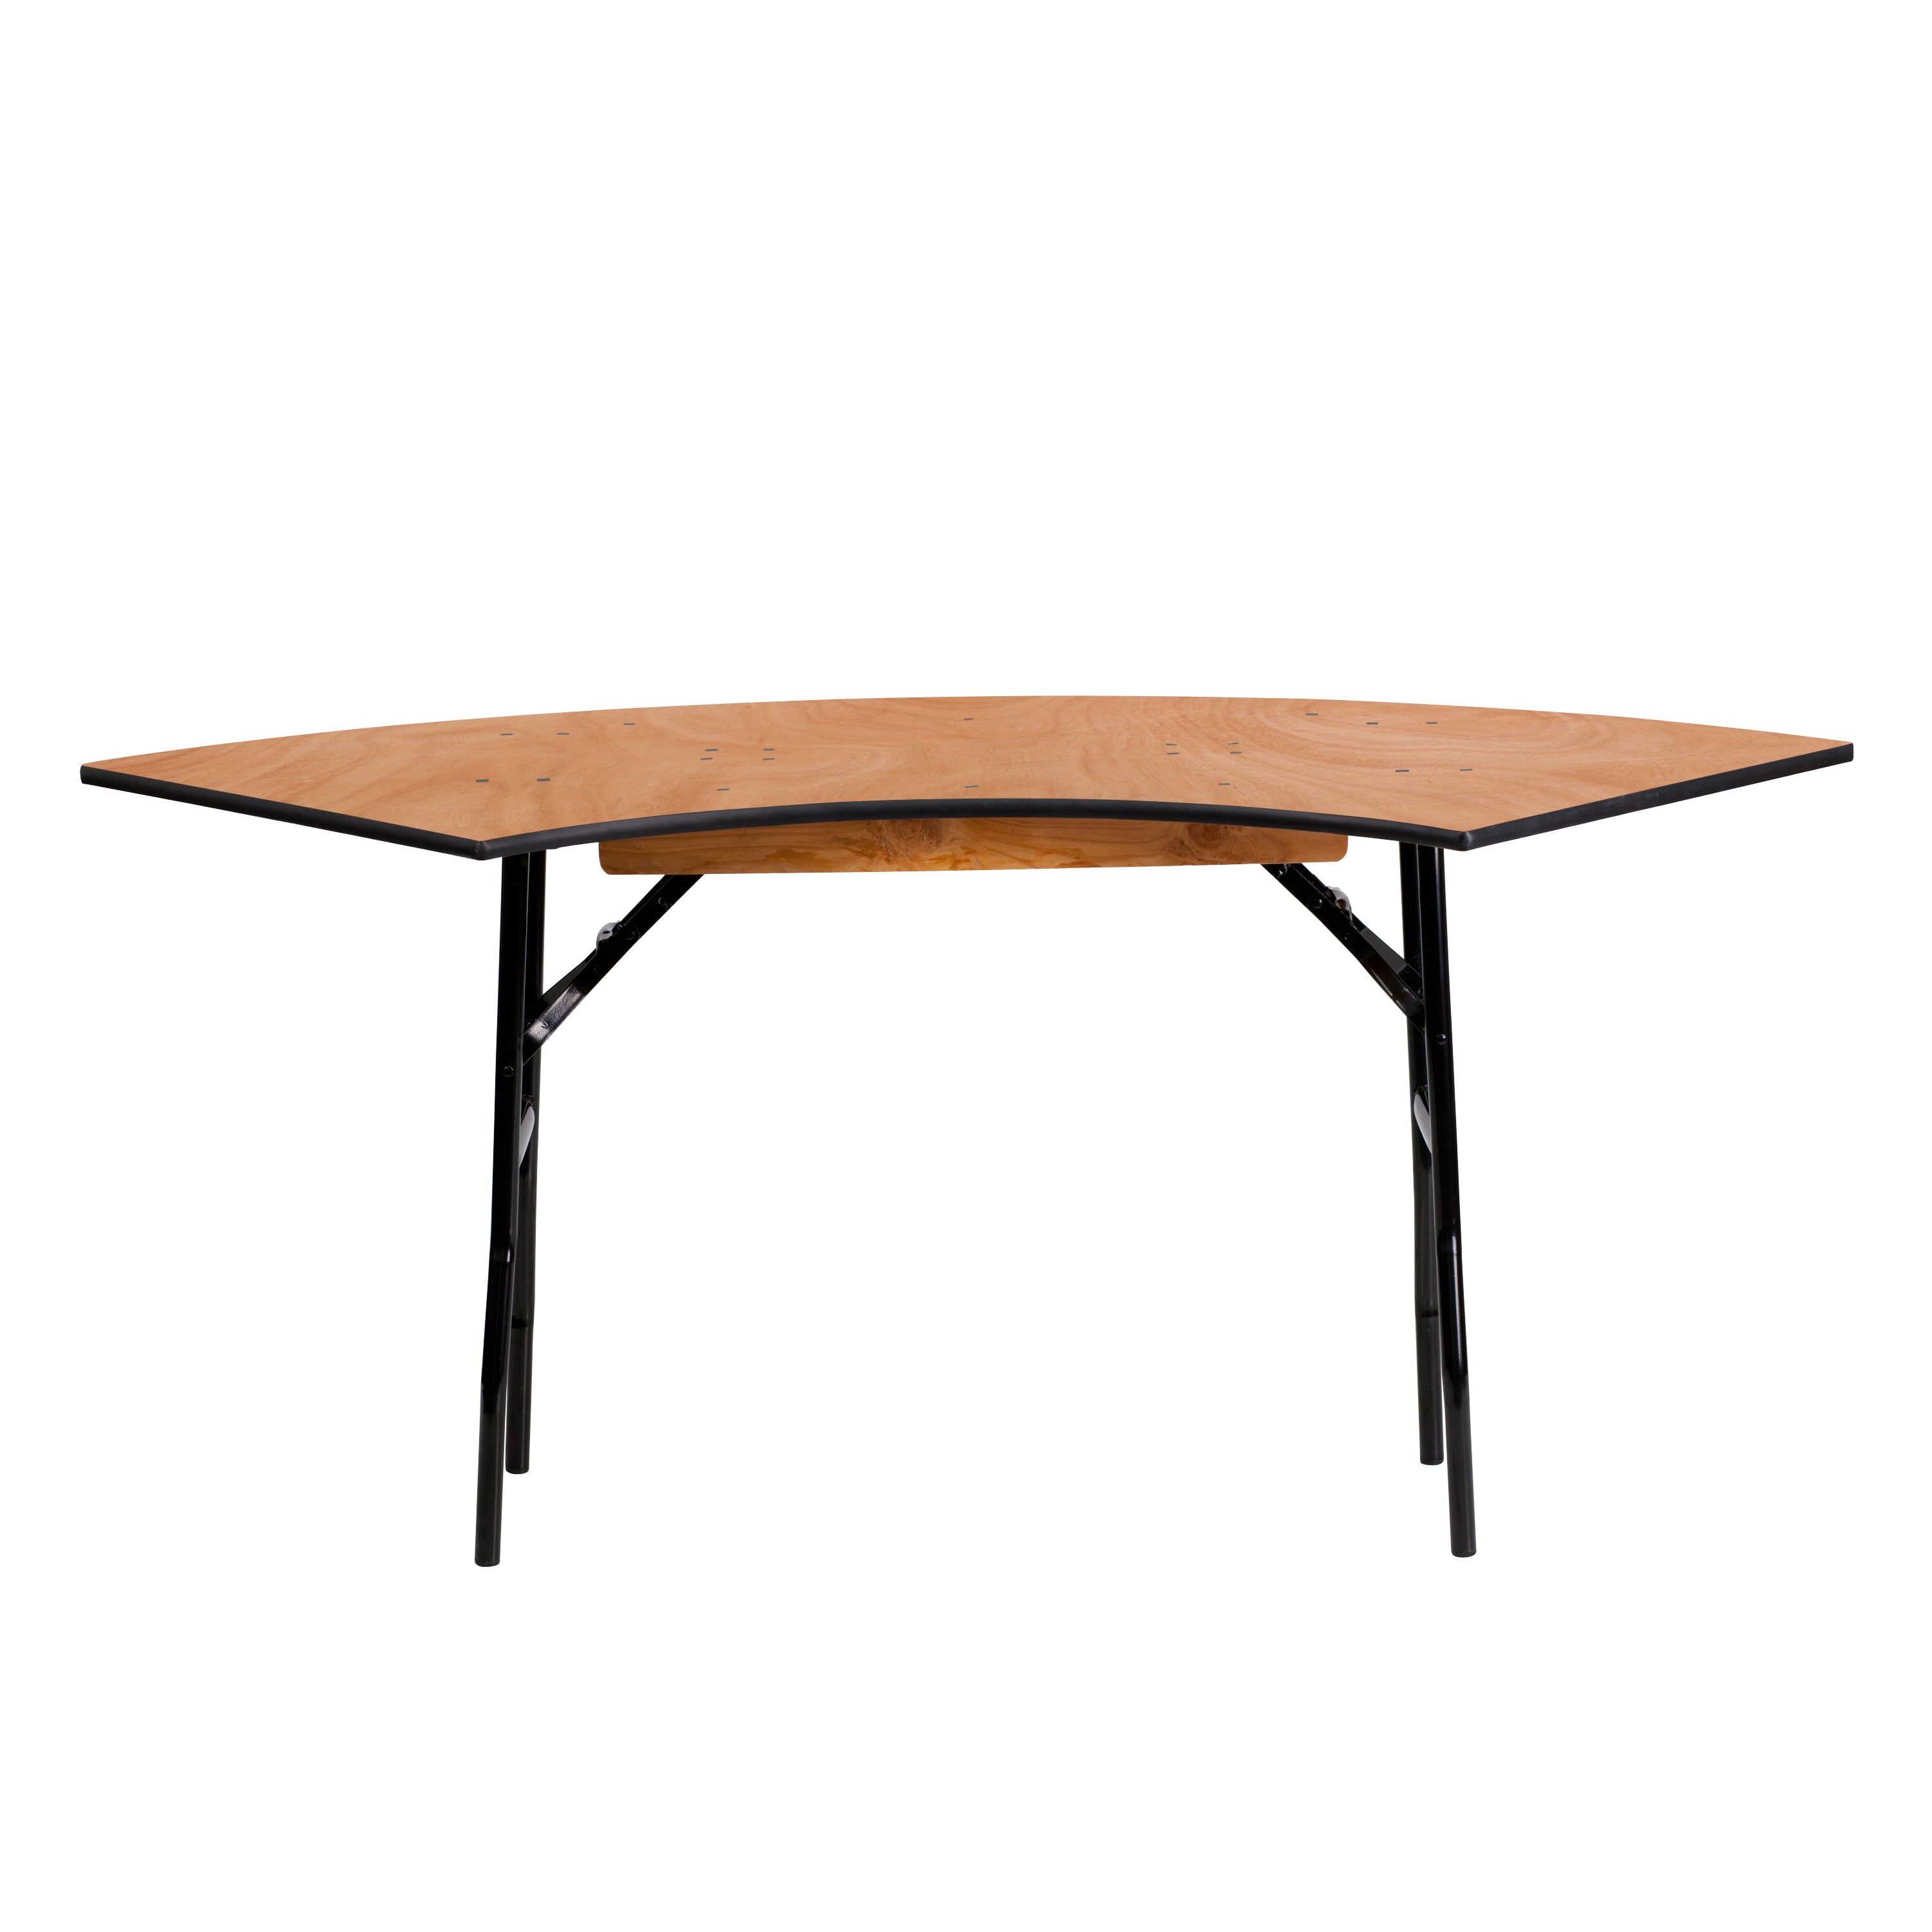 5.5 ft. x 2 ft. Serpentine Wood Folding Banquet Table-Serpentine Folding Table-Flash Furniture-Wall2Wall Furnishings